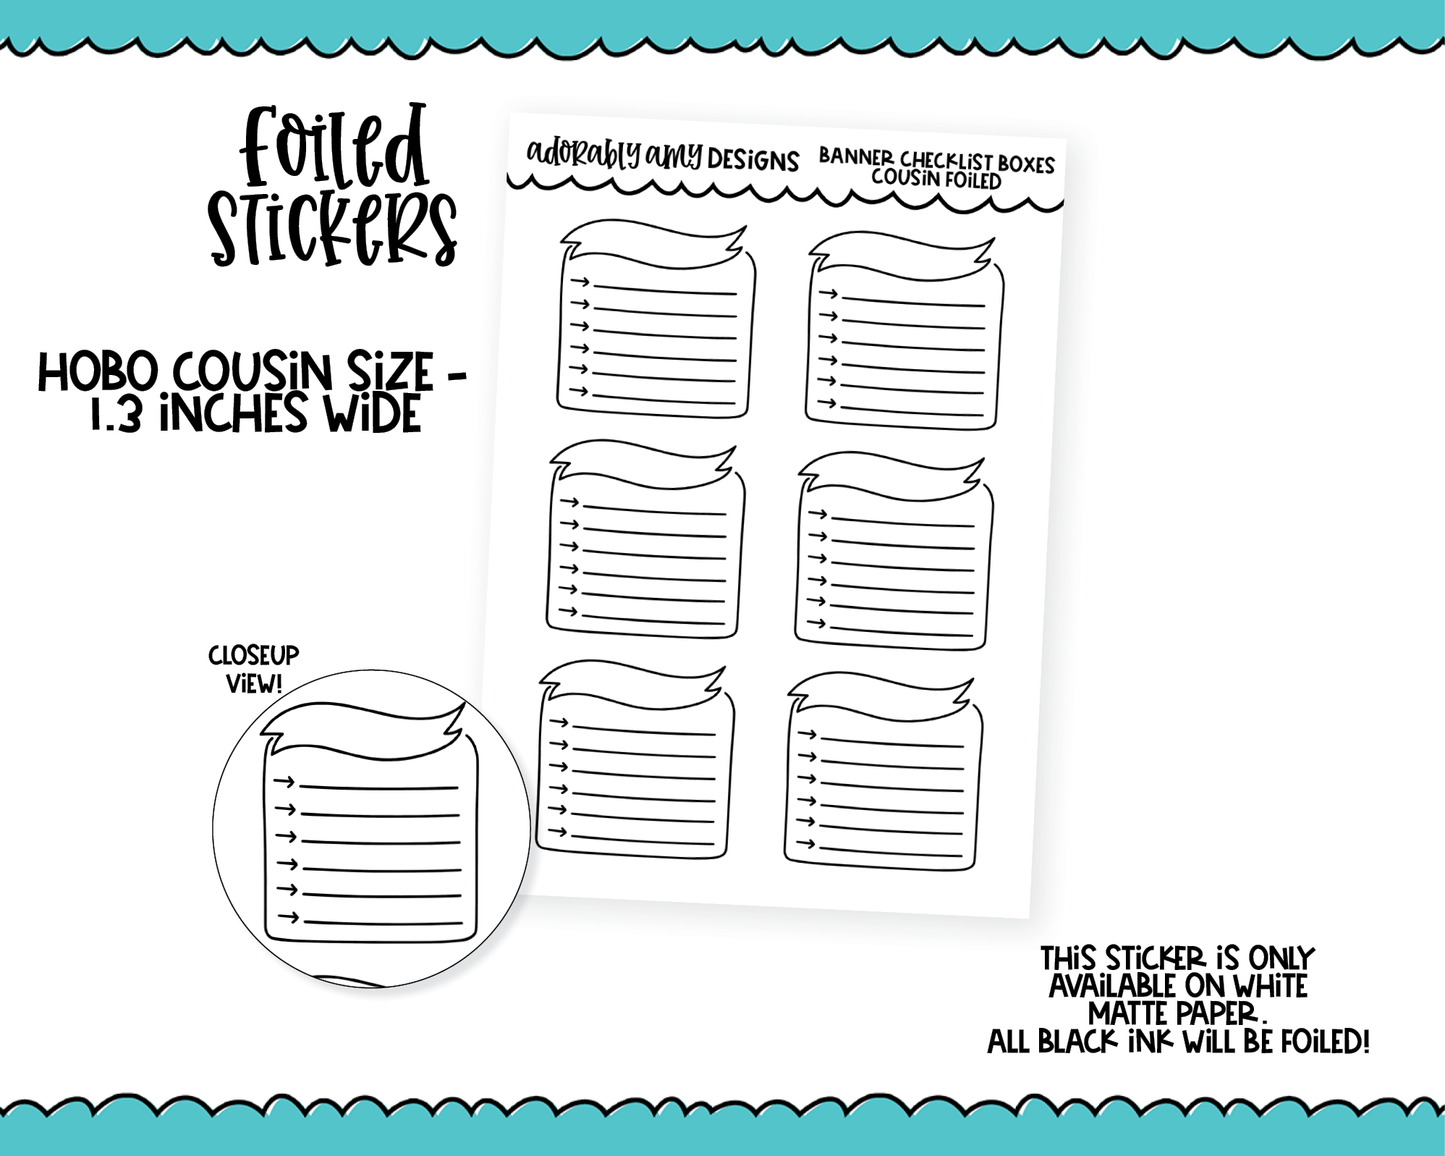 Foiled Hobo Cousin Banner Checklist Box Planner Stickers for Hobo Cousin or any Planner or Insert